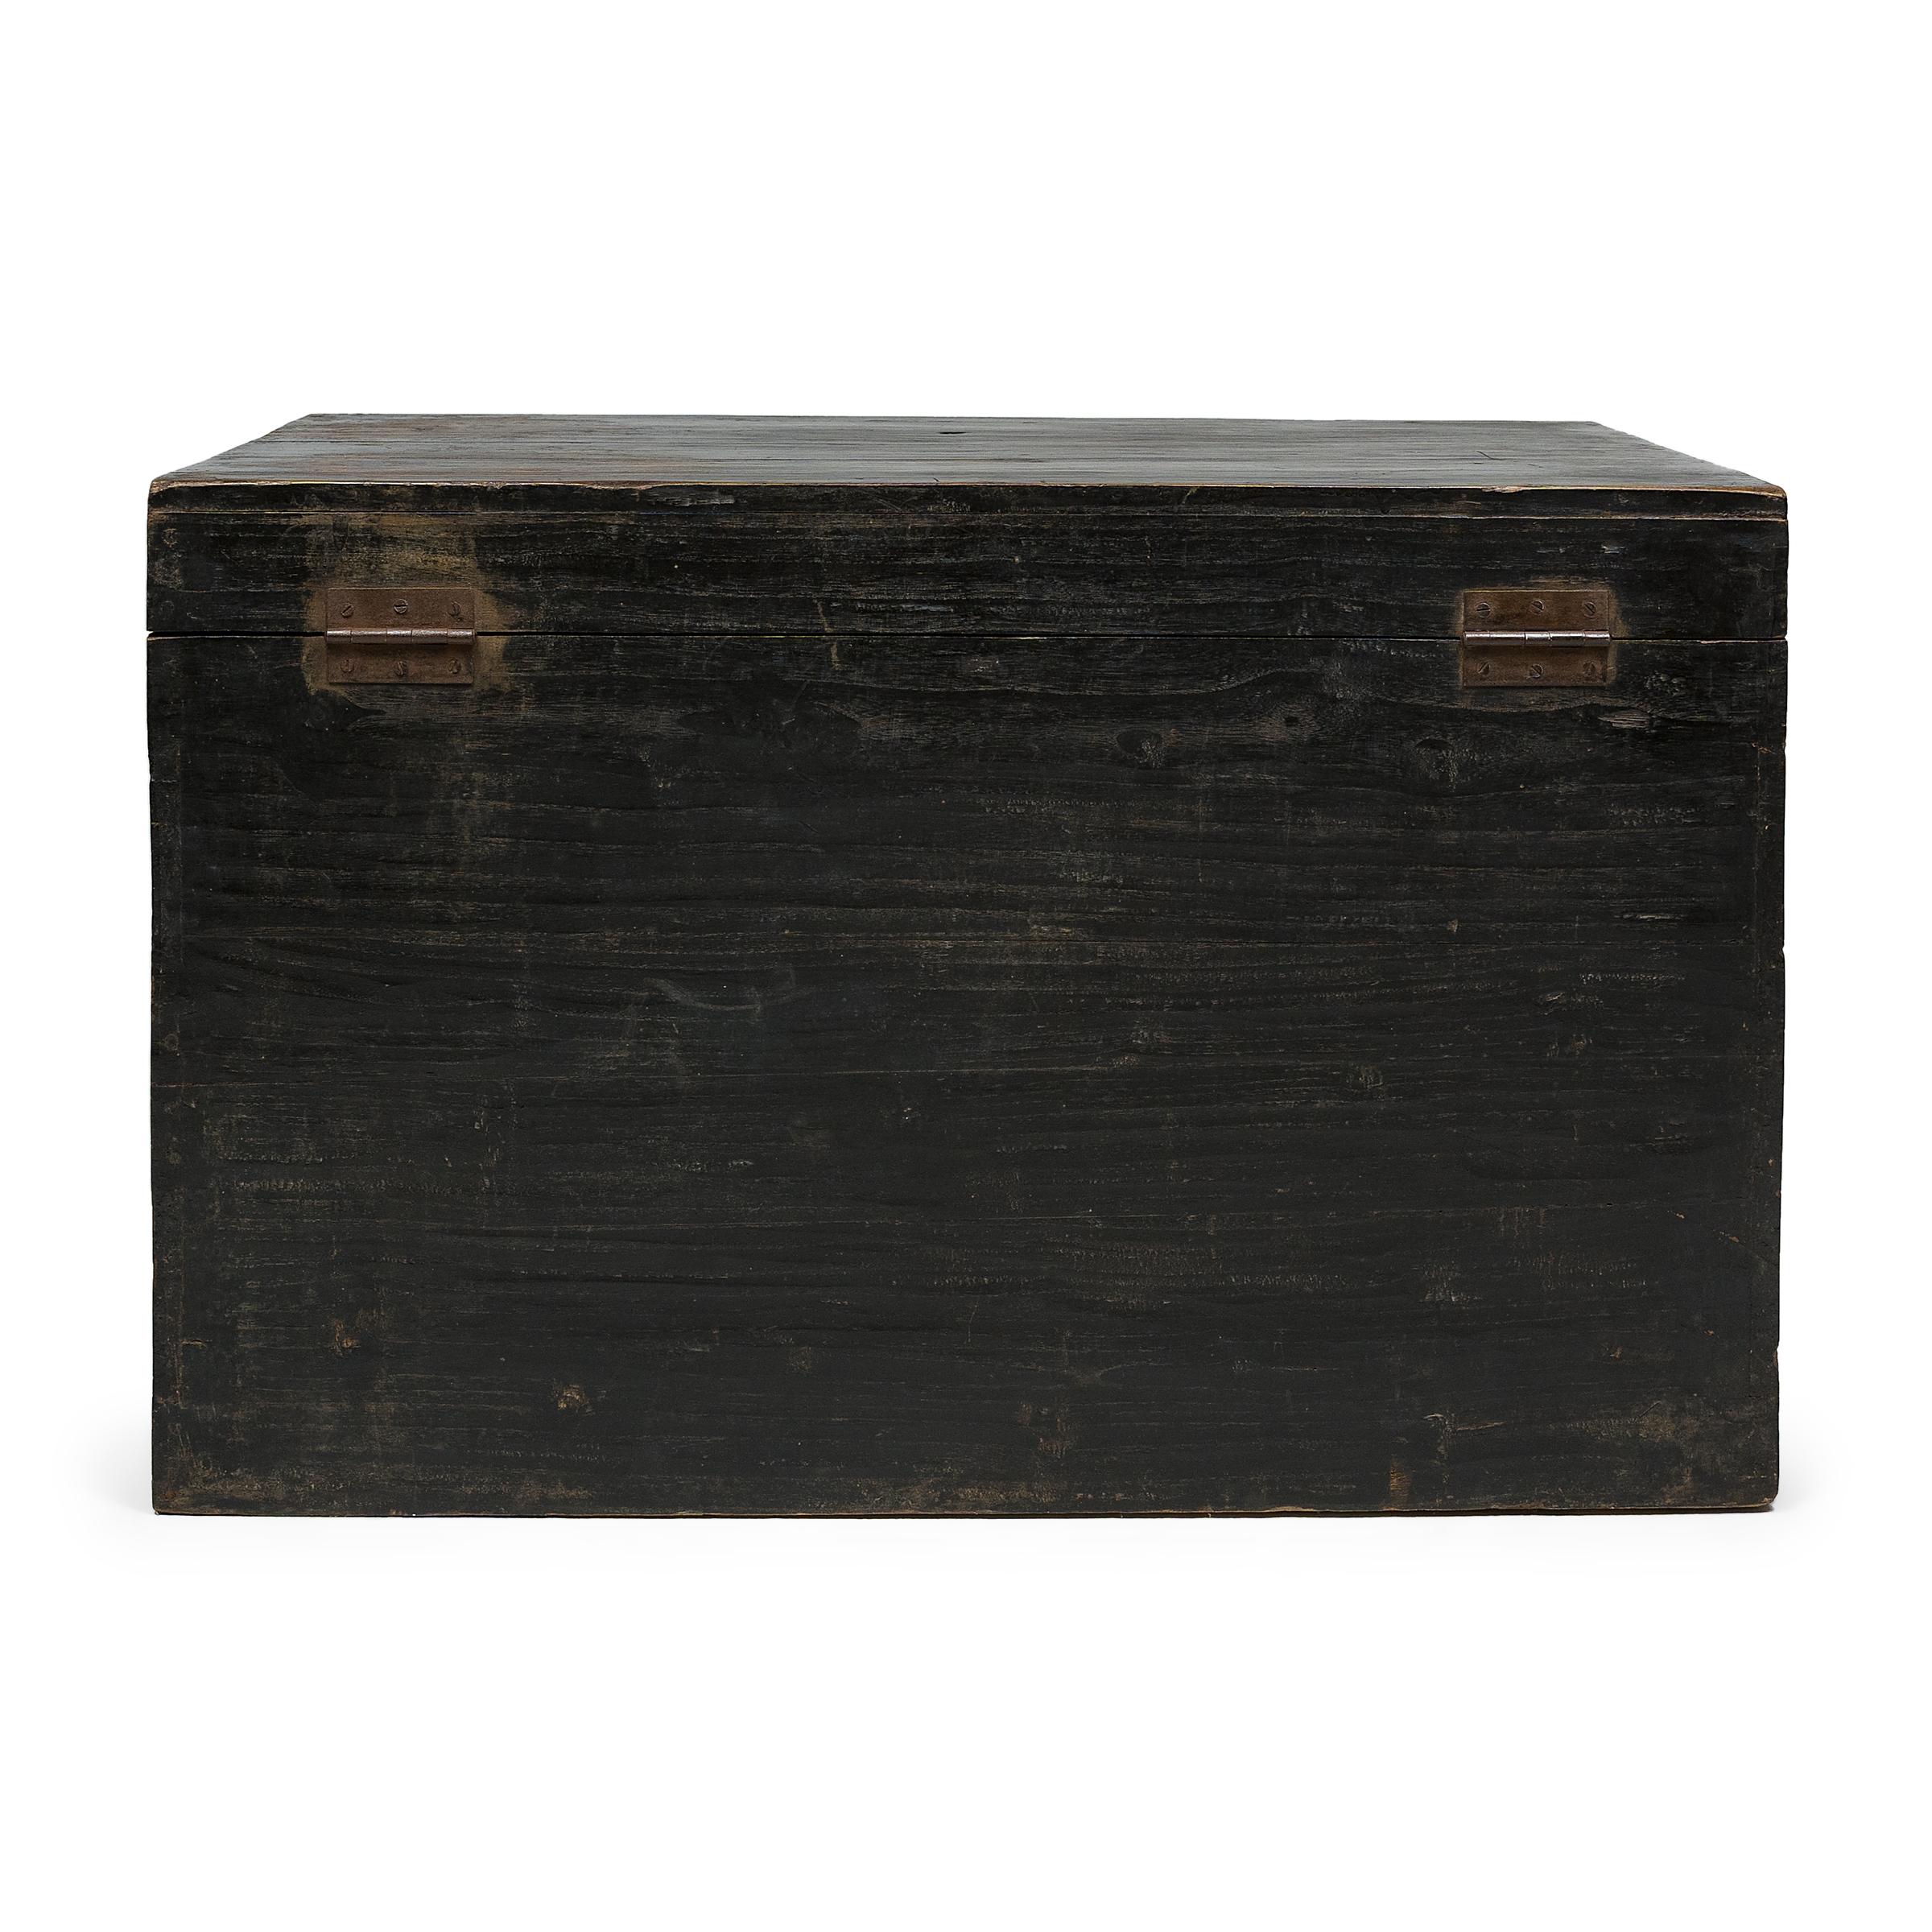 Wood Chinese Painted Festival Trunk, c. 1820 For Sale